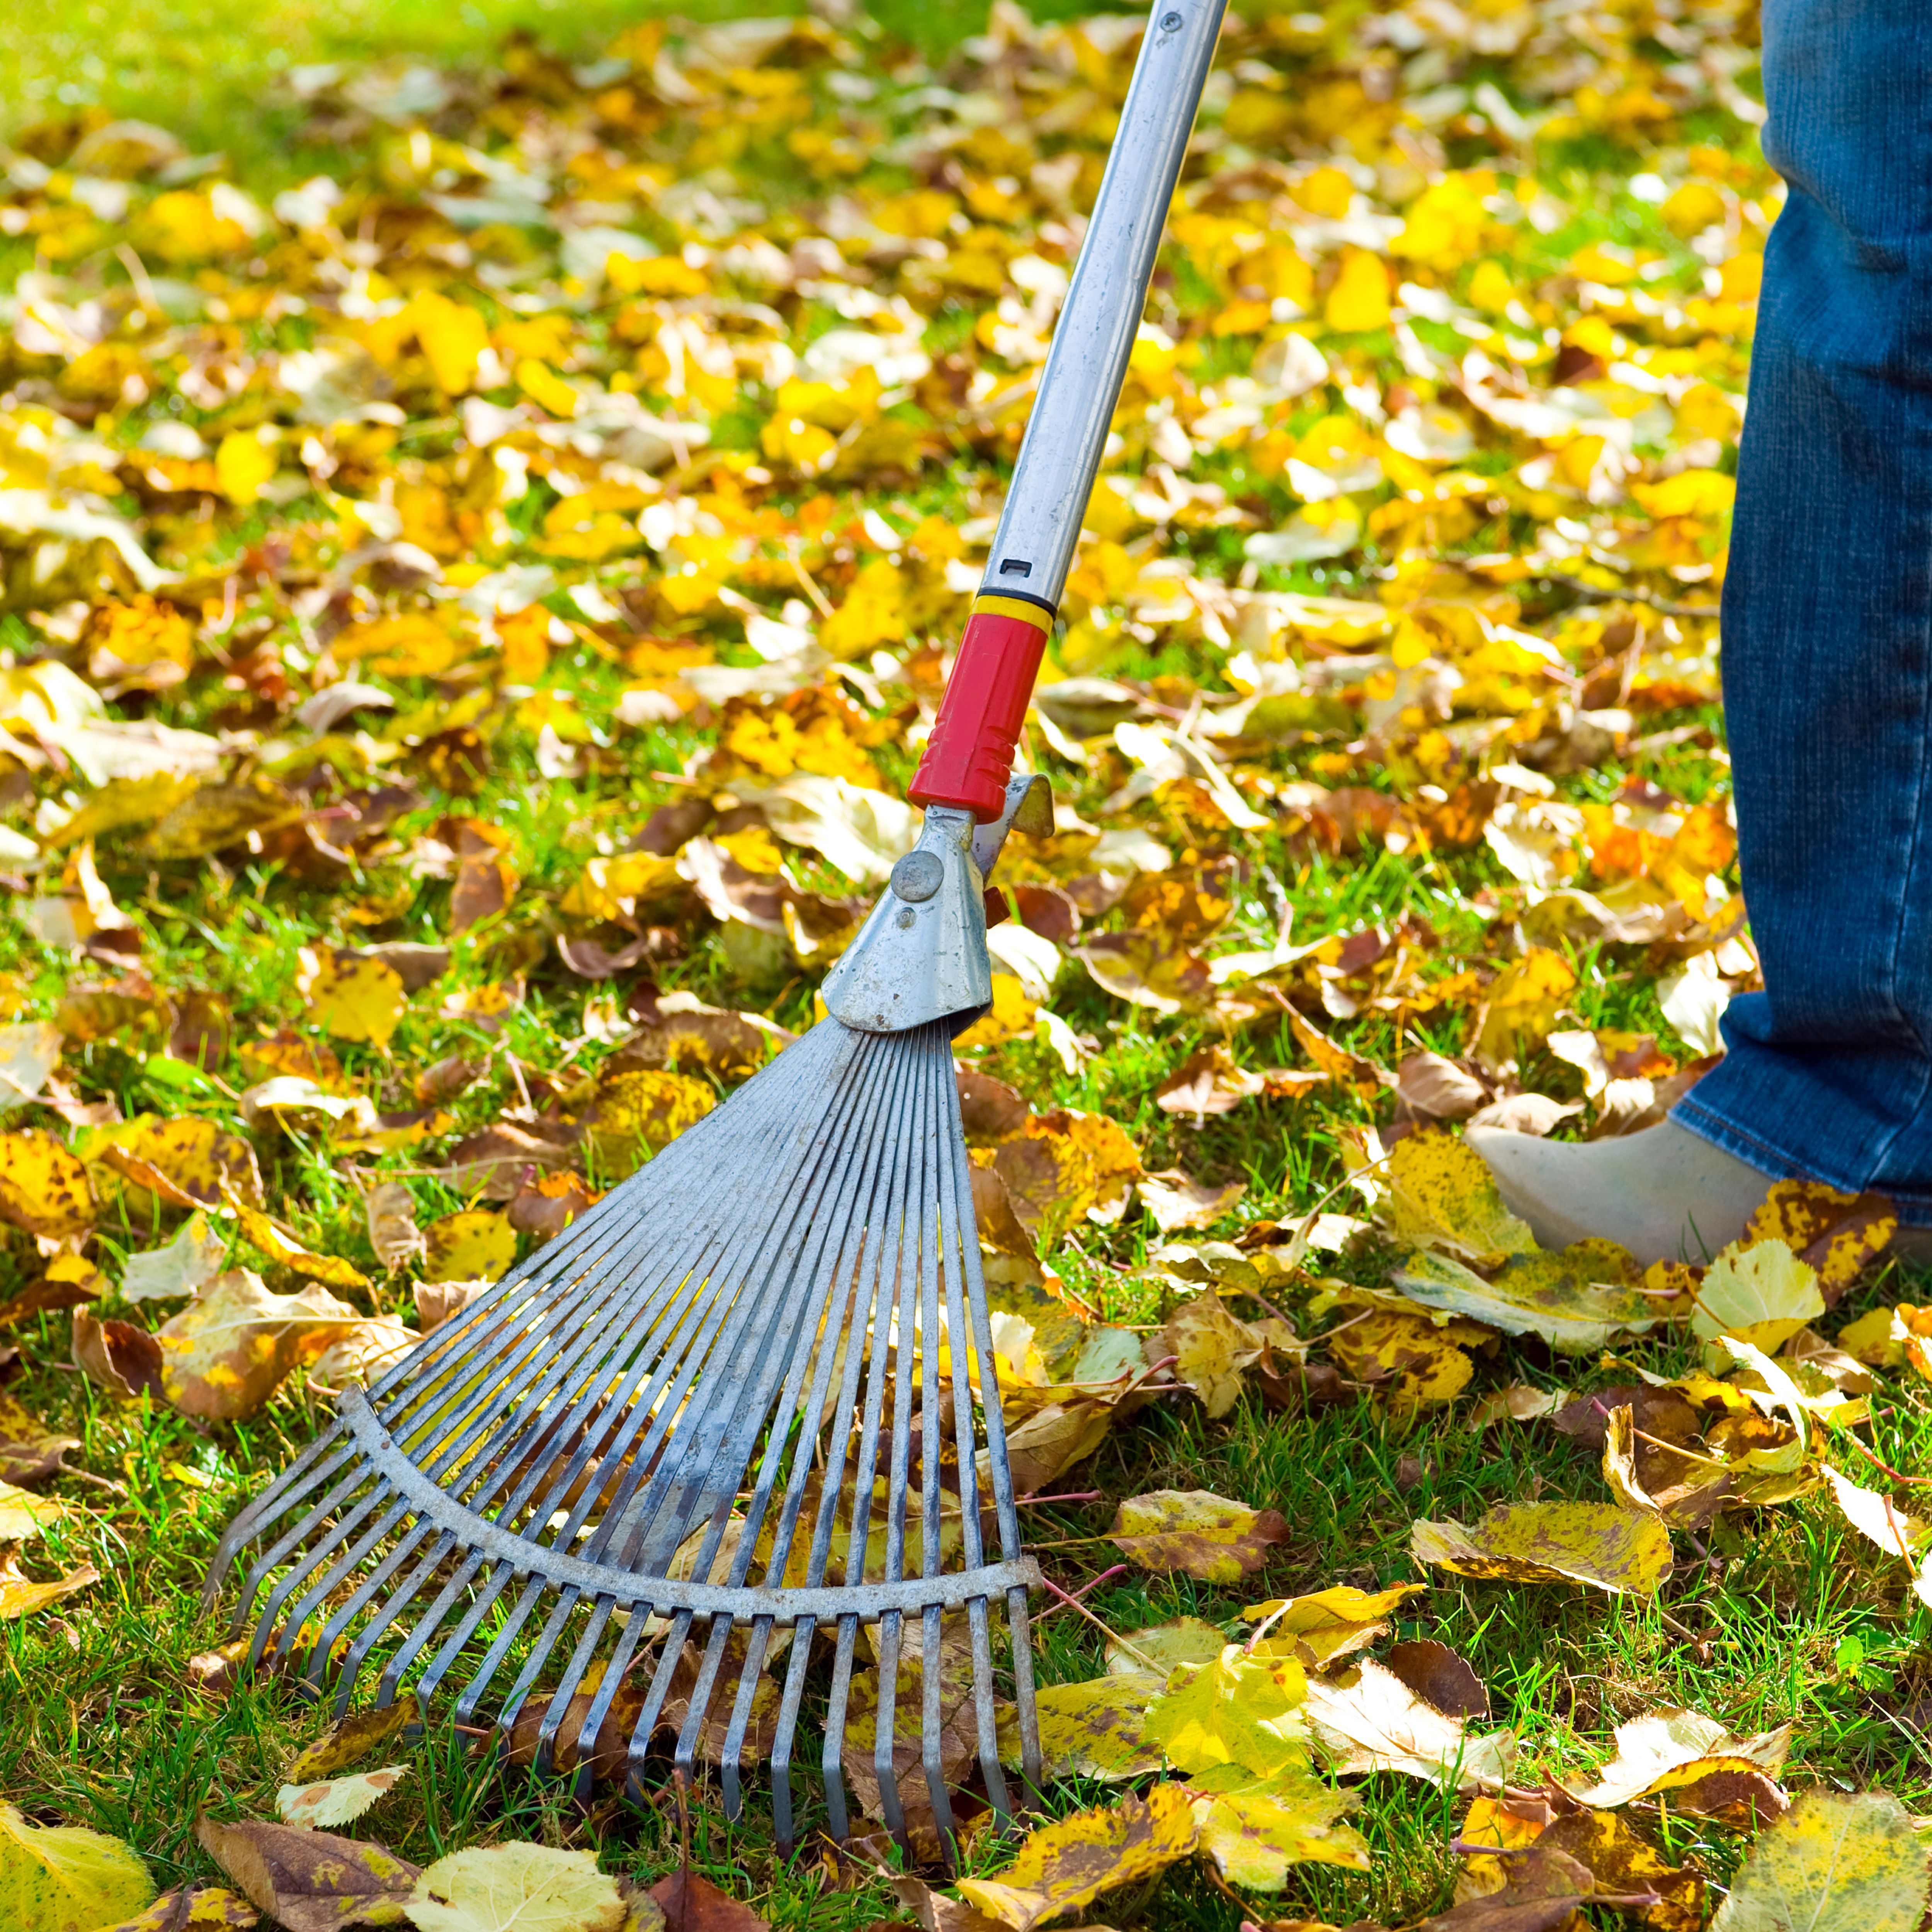 Autumn gardening ideas: Things to do in September | Ideas & Advice ...